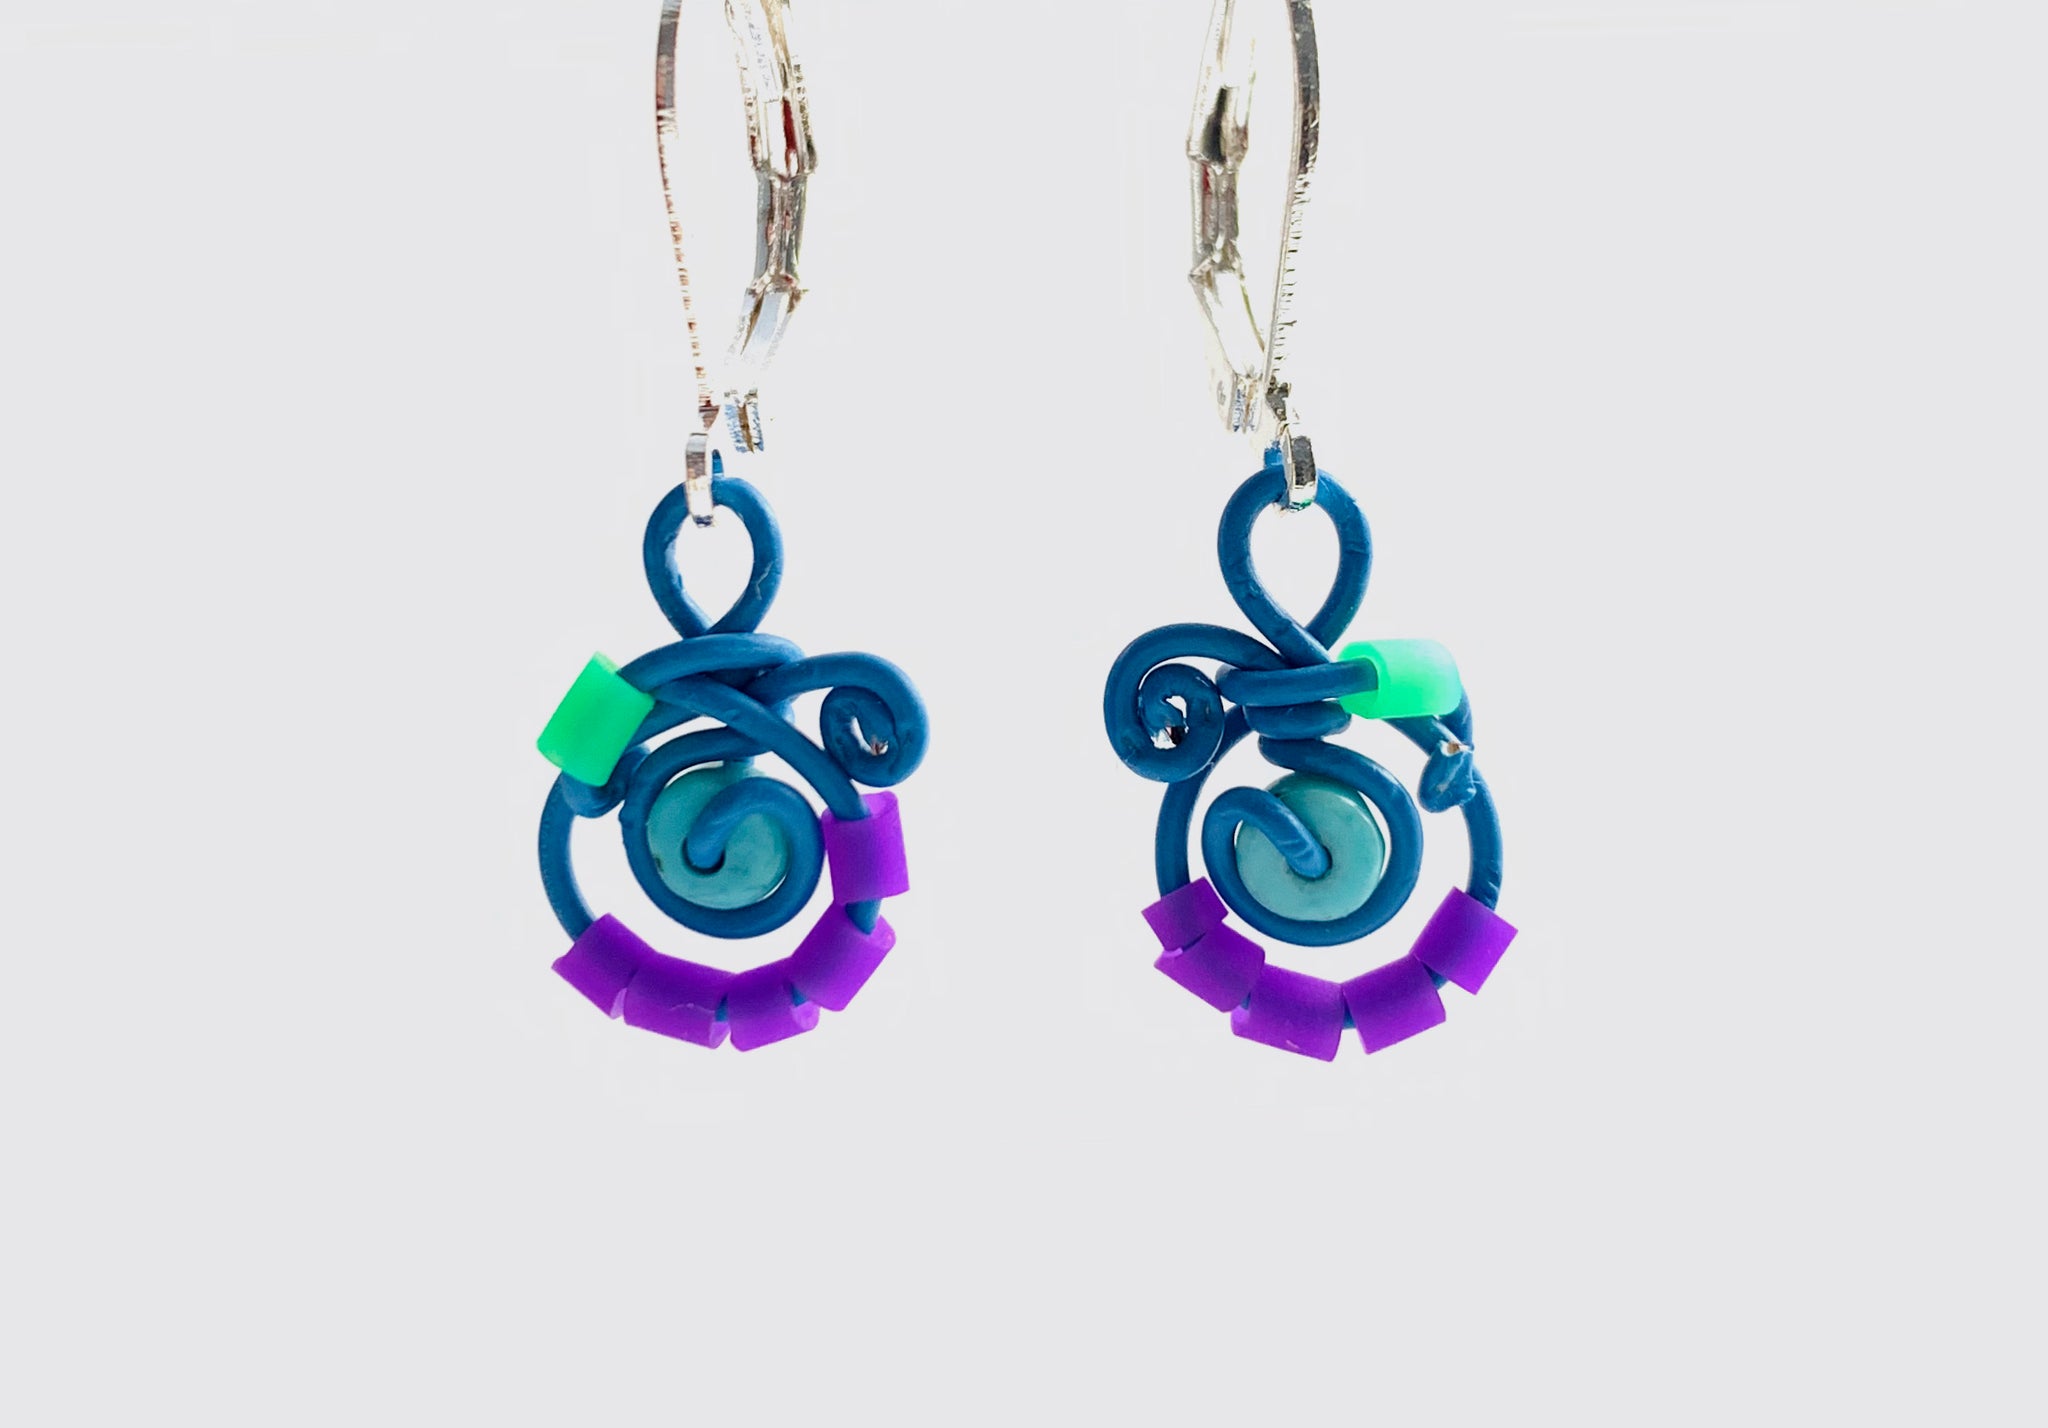 Classic MiMi Colour earrings in blue with turquoise, purple + green